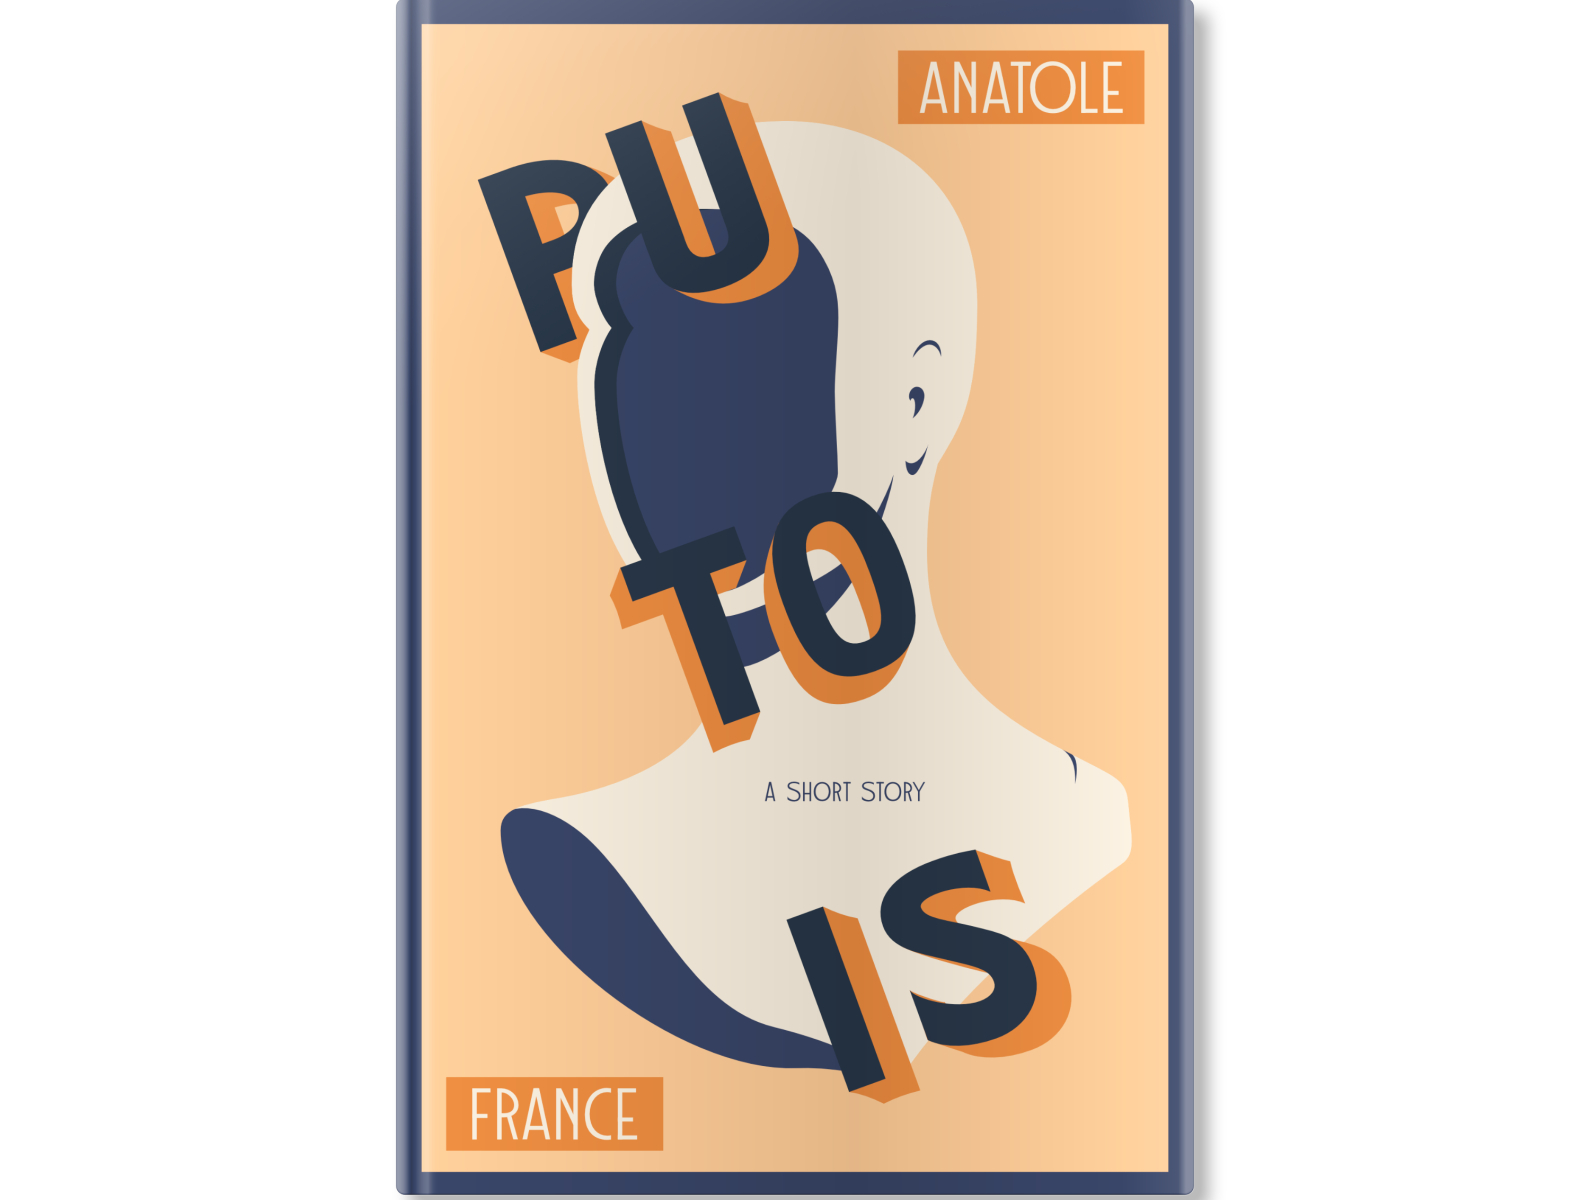 Putois by Anatole France book cover book cover design design illustration lettering typography